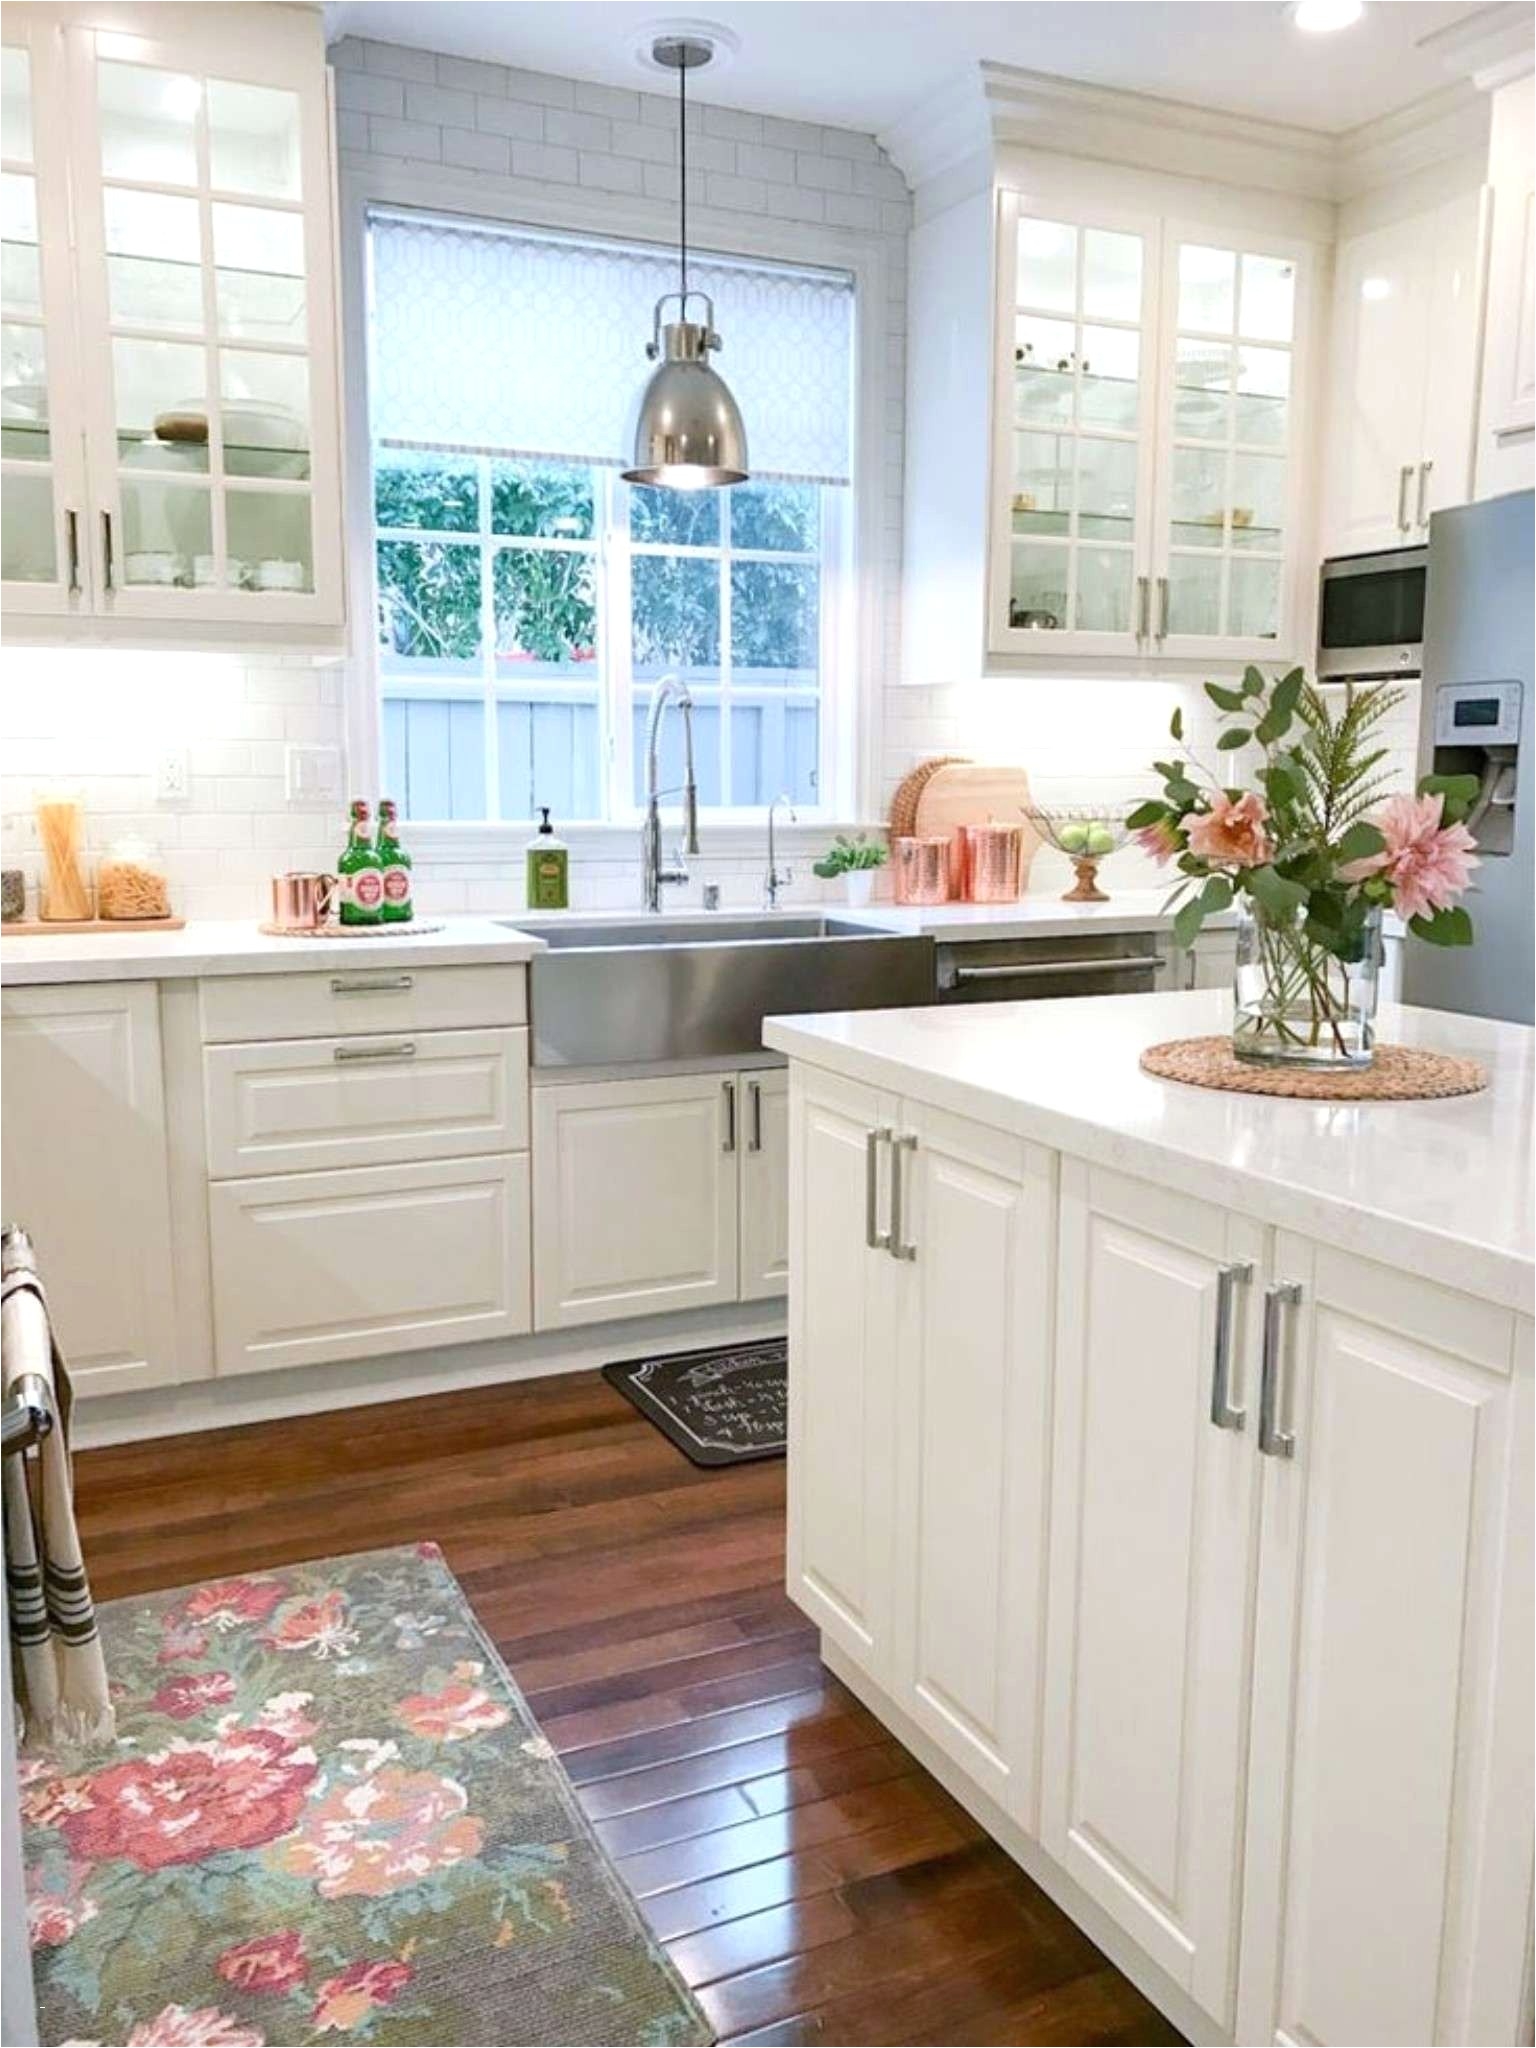 Cream Kitchen Cabinets Gorgeous Painting Kitchen Cabinets Two Different Colors